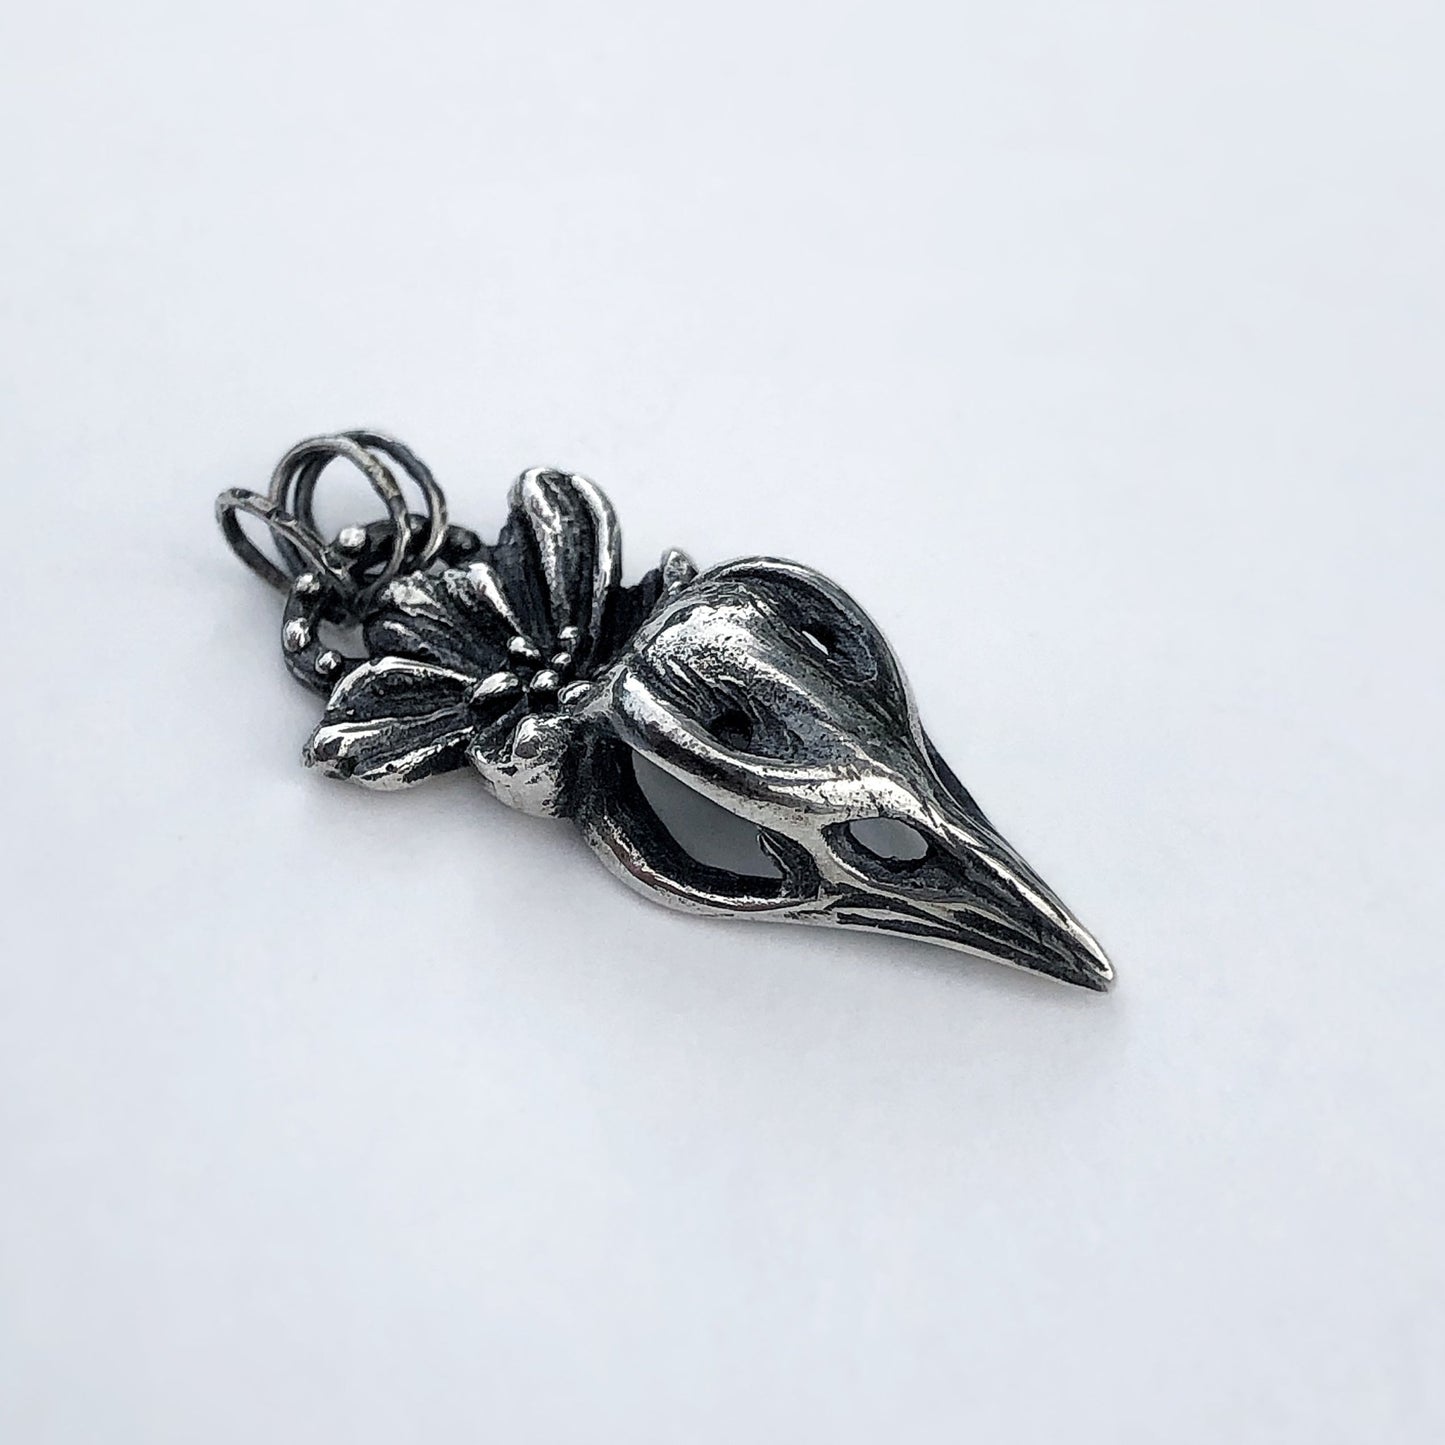 Raven Skull and Flowers Pendant - ALMOST GONE